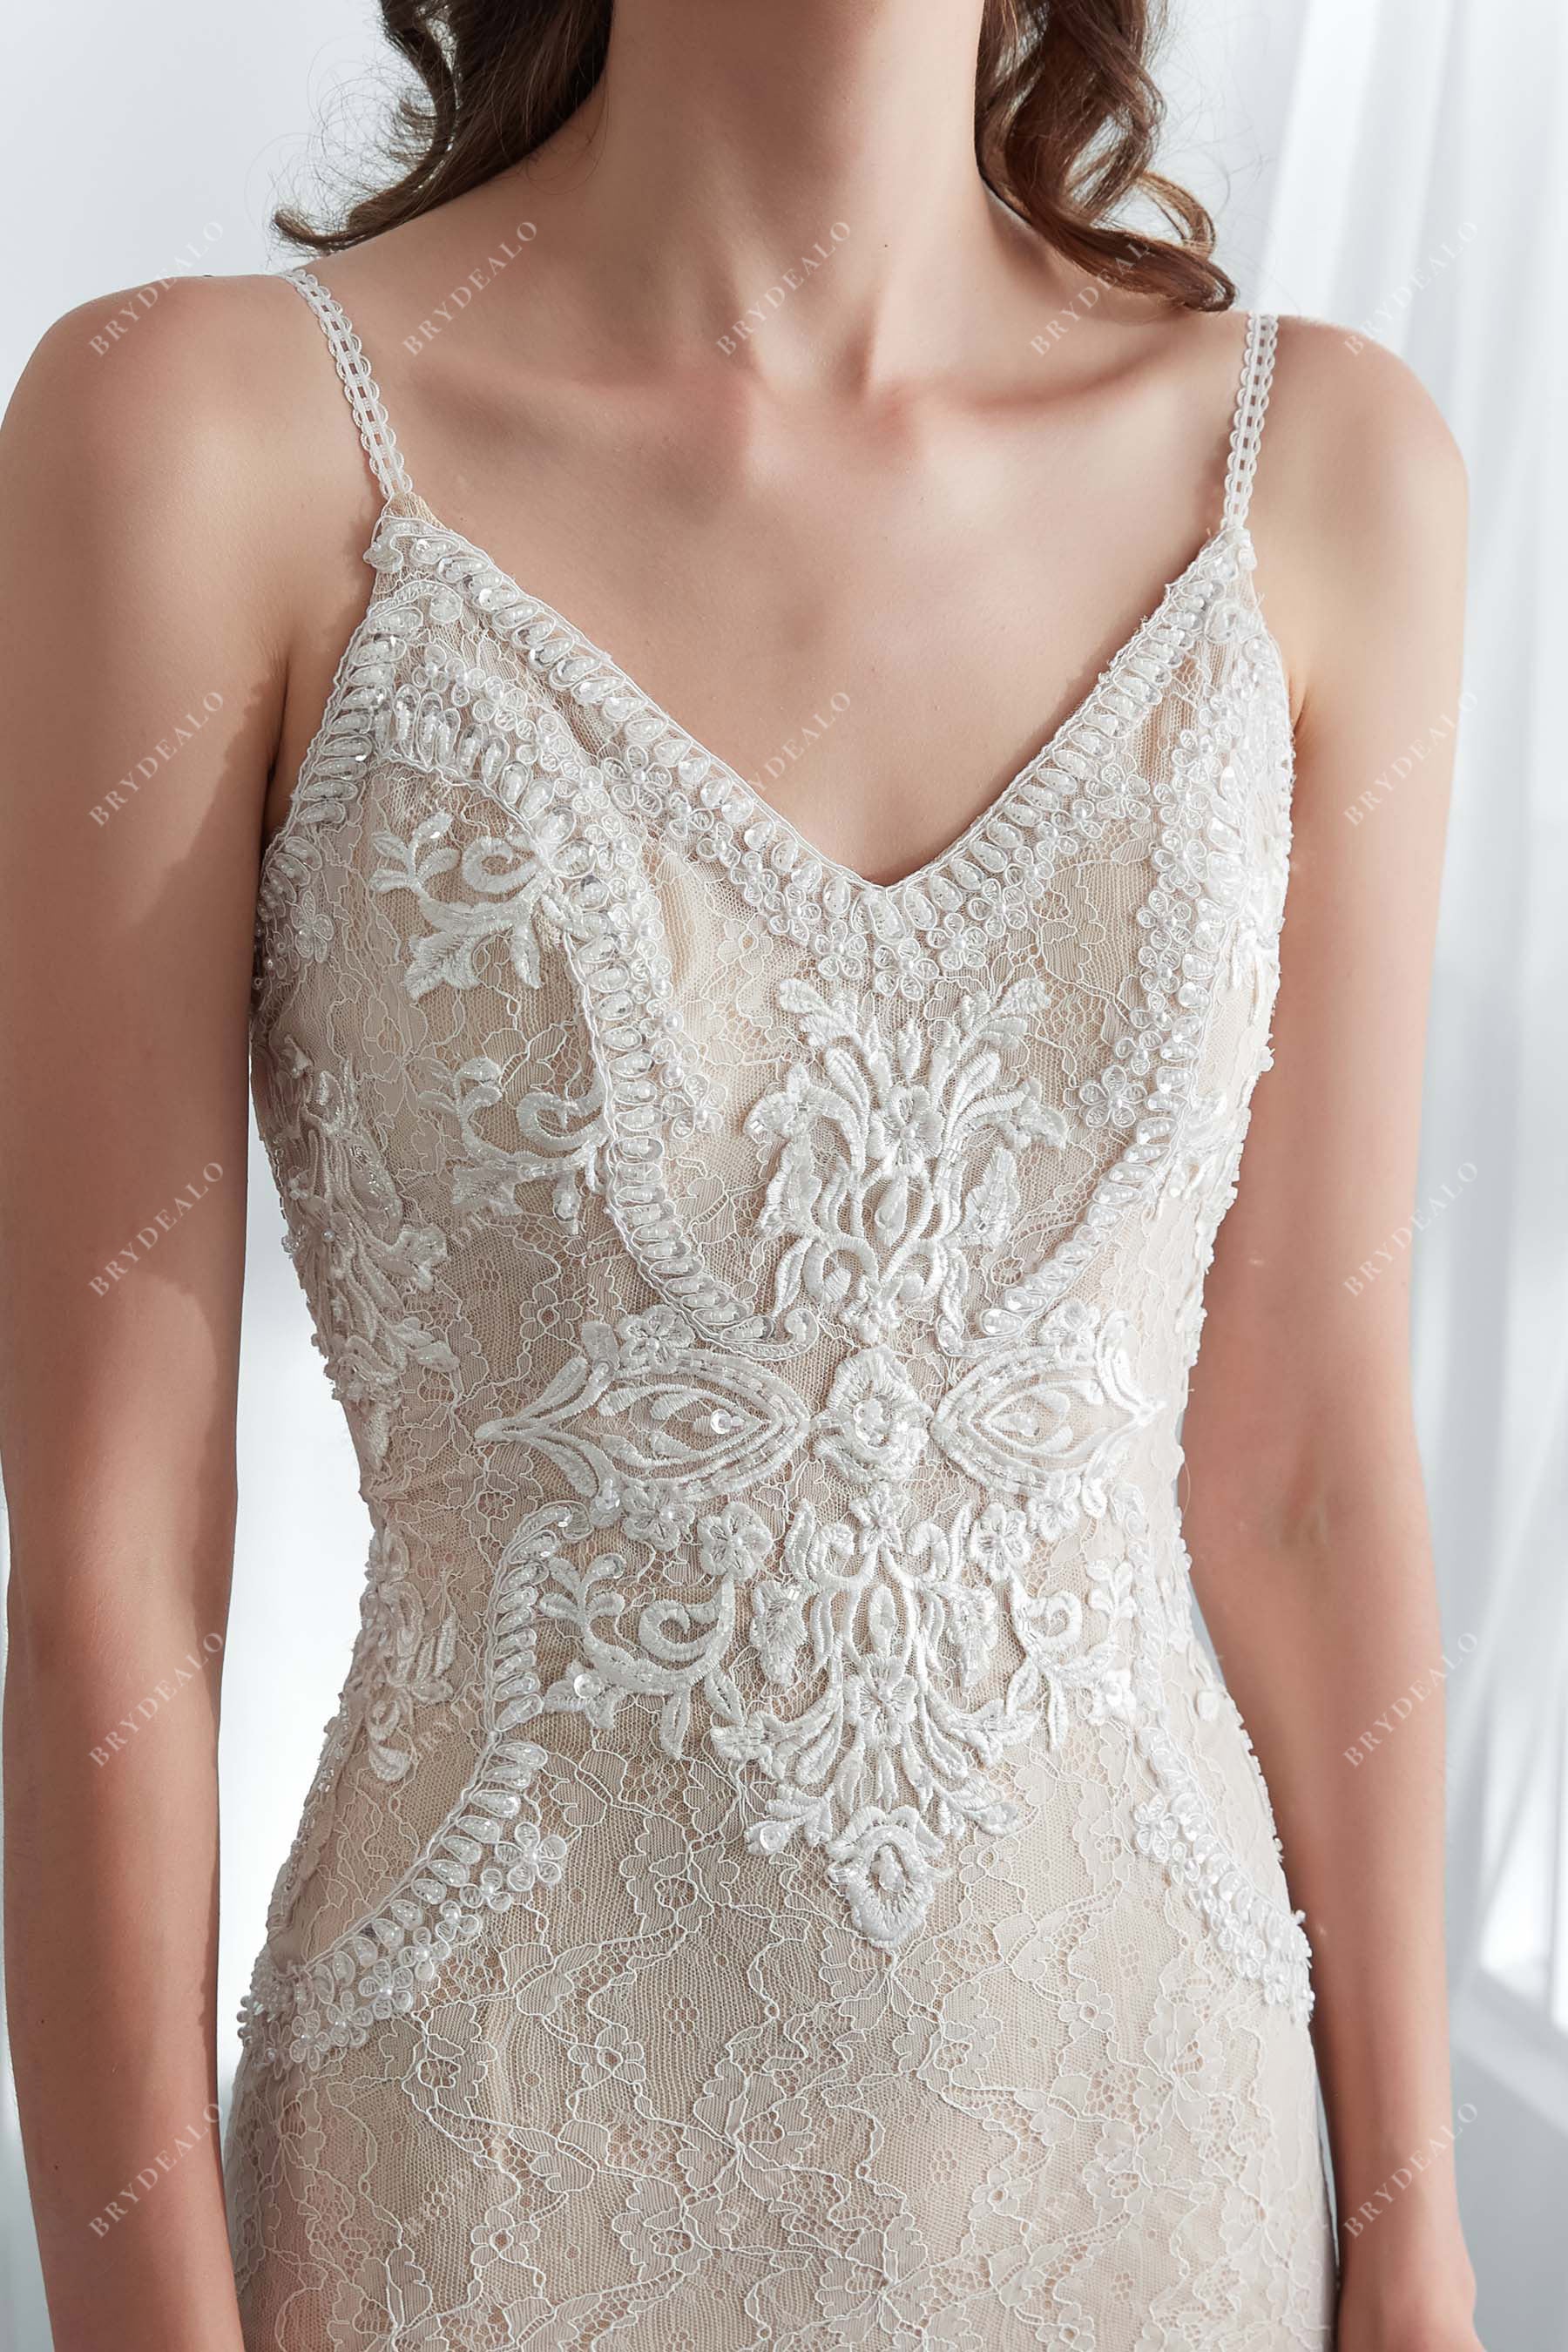 Designer Lace Thin Straps Sleeveless Bridal Gown